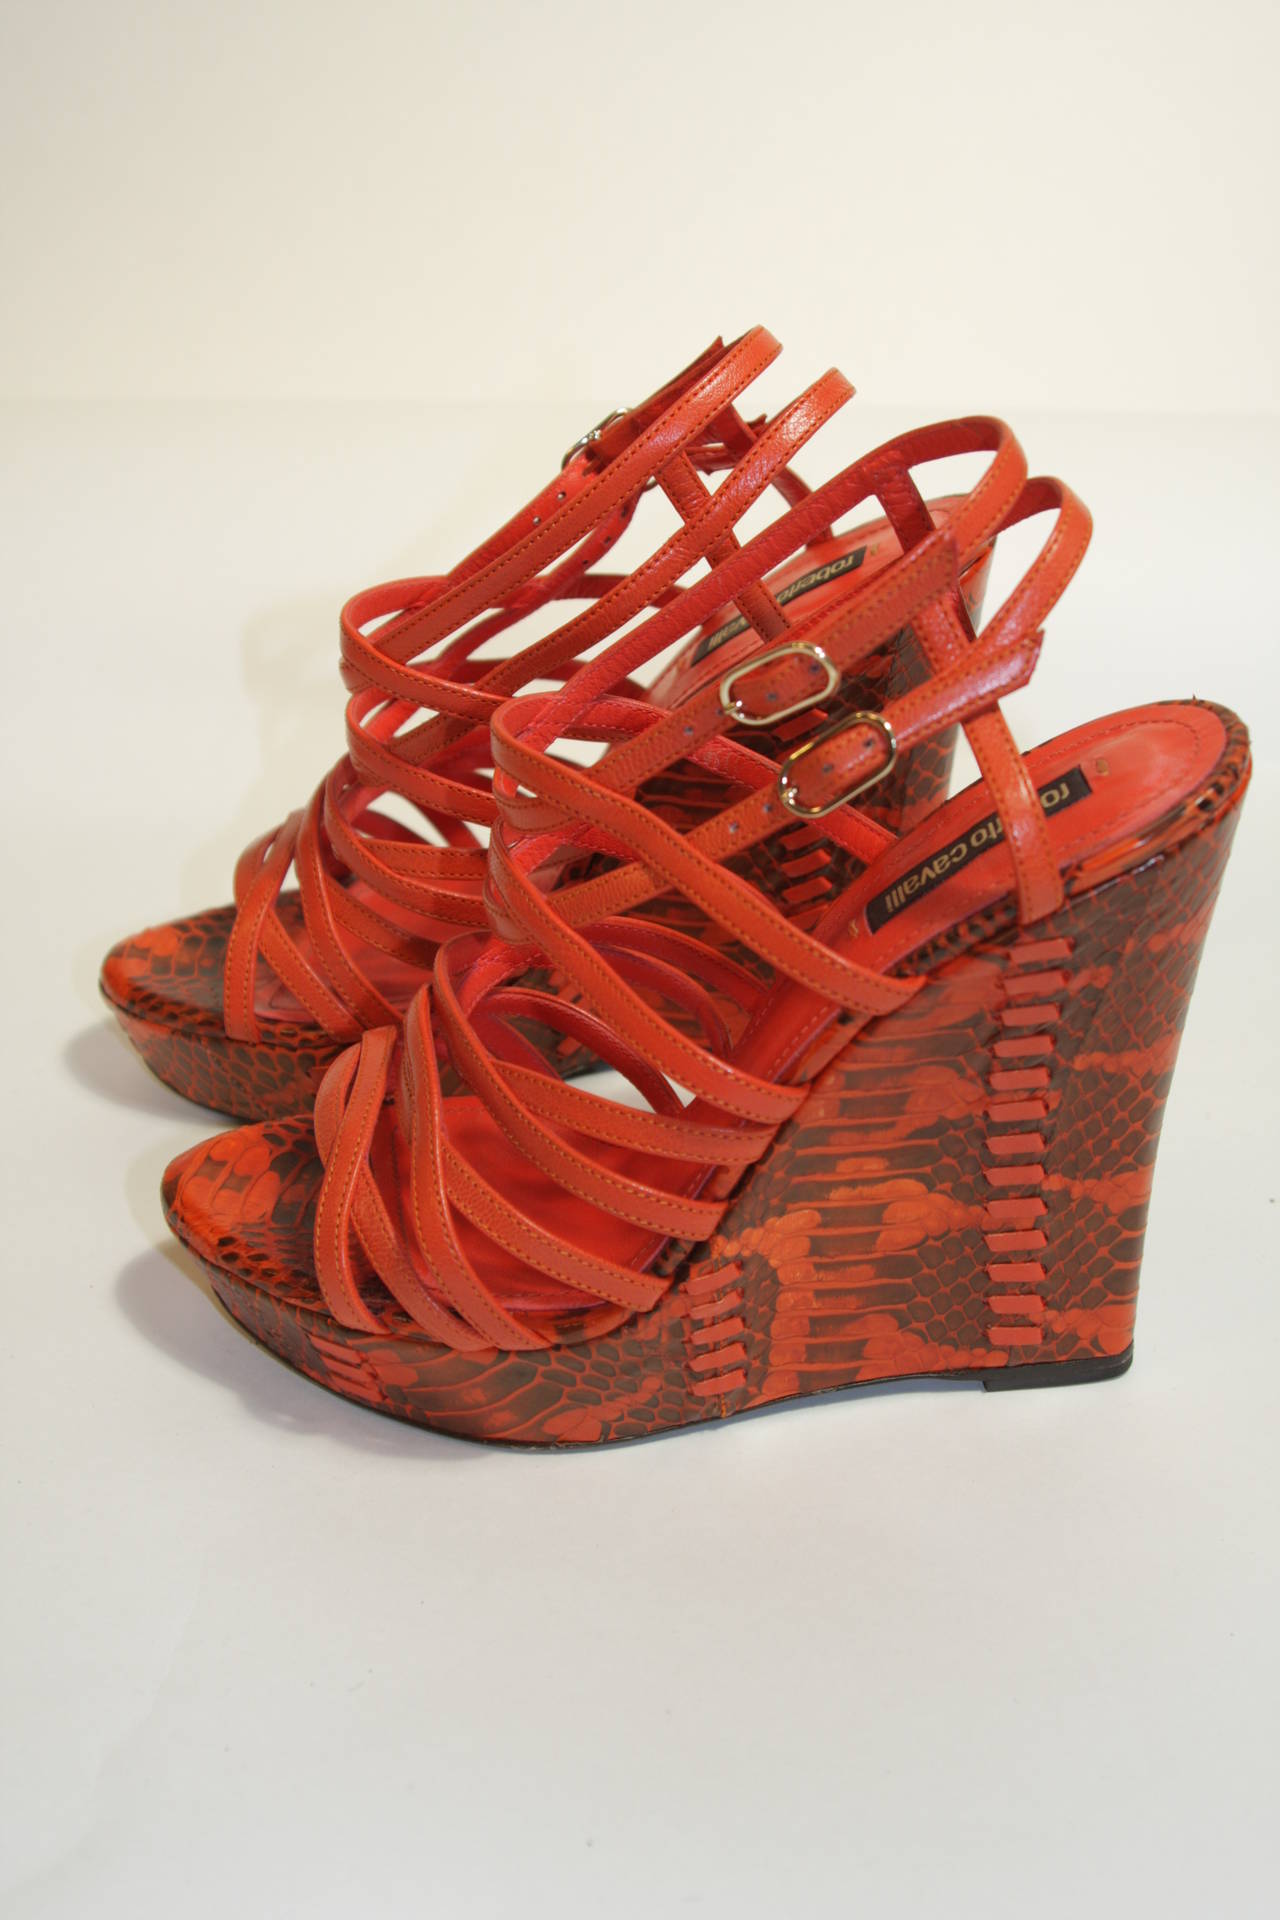 These Roberto Cavalli wedges are in excellent condition and only feature slight wear on the soles, worn less than a handful of times. They are composed of orange snakeskin and leather. Multi-strap design with dual buckles and slim cut wedge. Comes